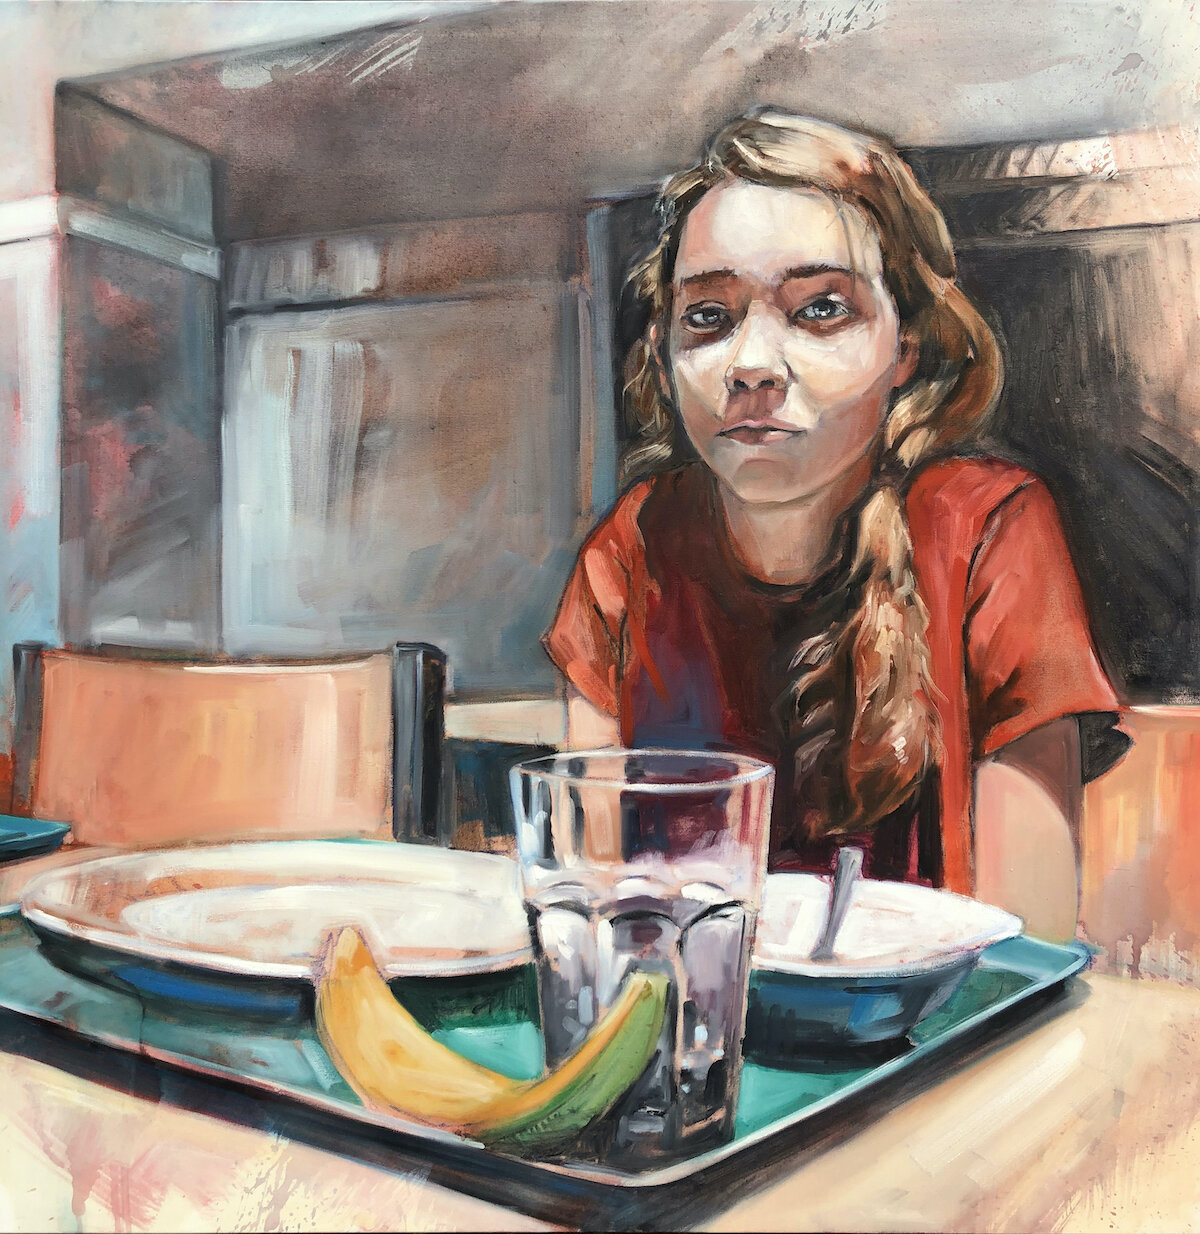    After Lunch With My Oldest  , 48” x 48”, oil on canvas 